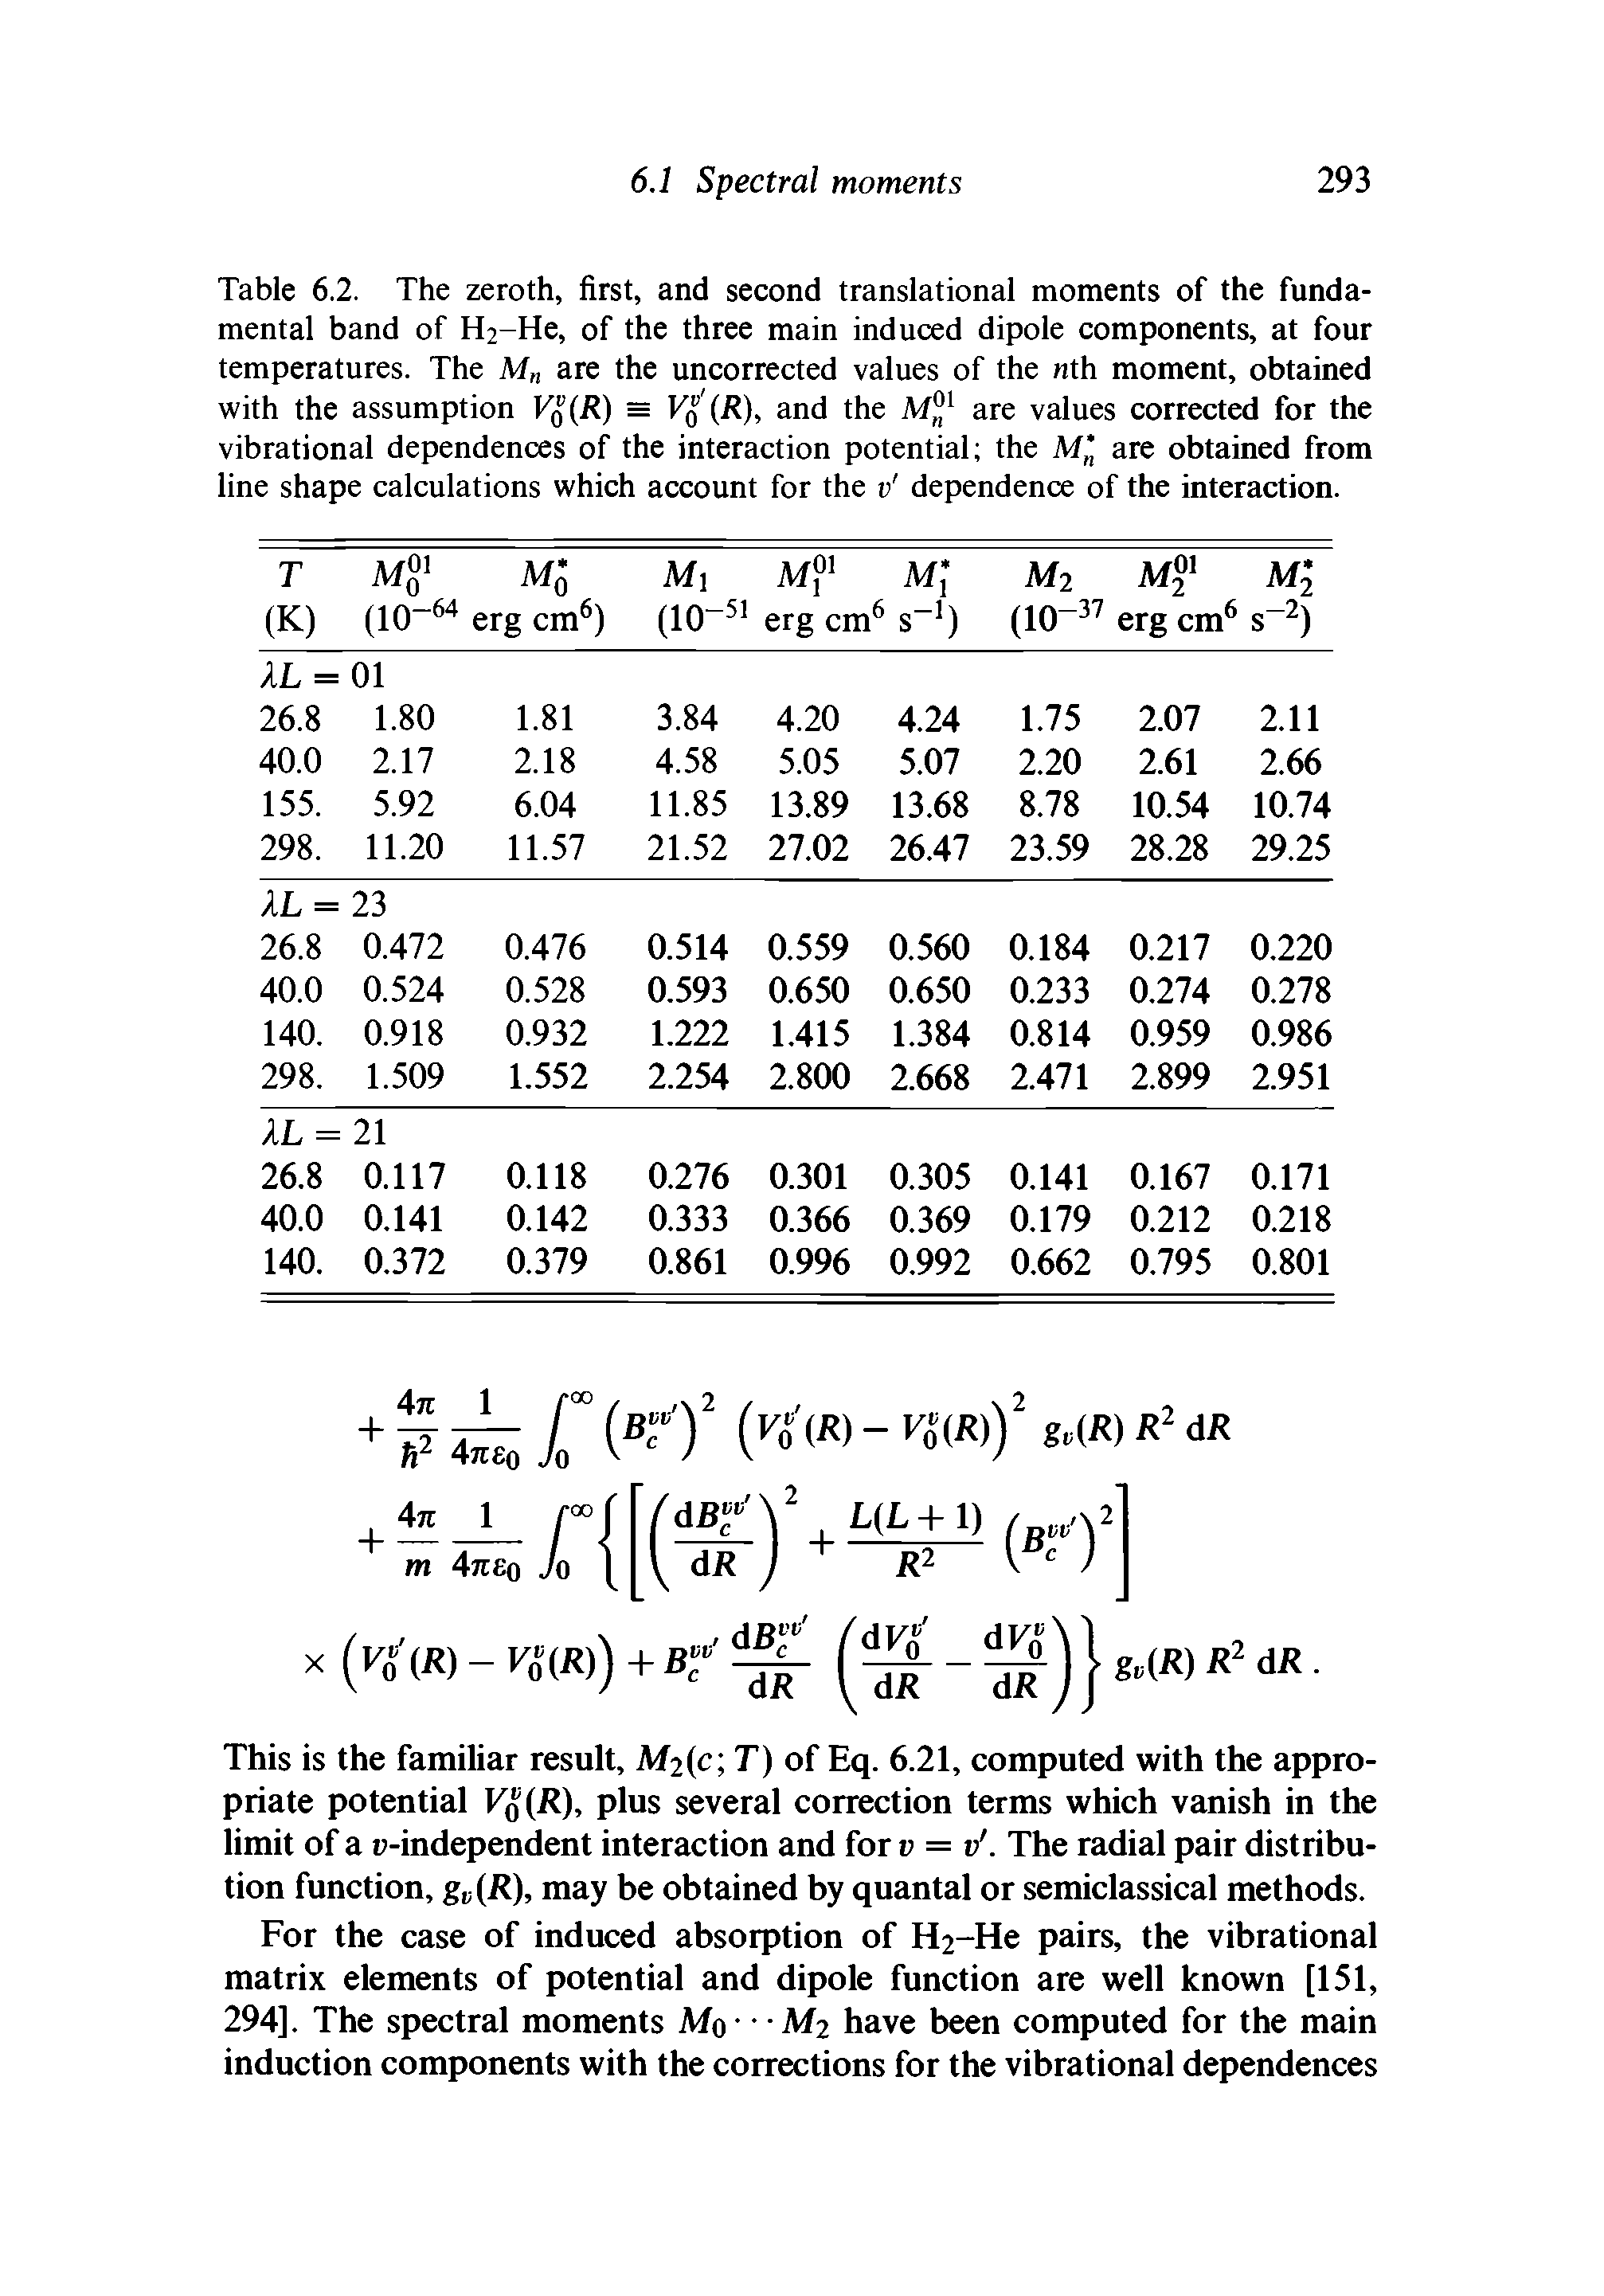 Table 6.2. The zeroth, first, and second translational moments of the fundamental band of Fh-He, of the three main induced dipole components, at four temperatures. The M are the uncorrected values of the nth moment, obtained with the assumption Kg (/ ) = J/0l/ (R), and the M 1 are values corrected for the vibrational dependences of the interaction potential the M are obtained from line shape calculations which account for the v dependence of the interaction.